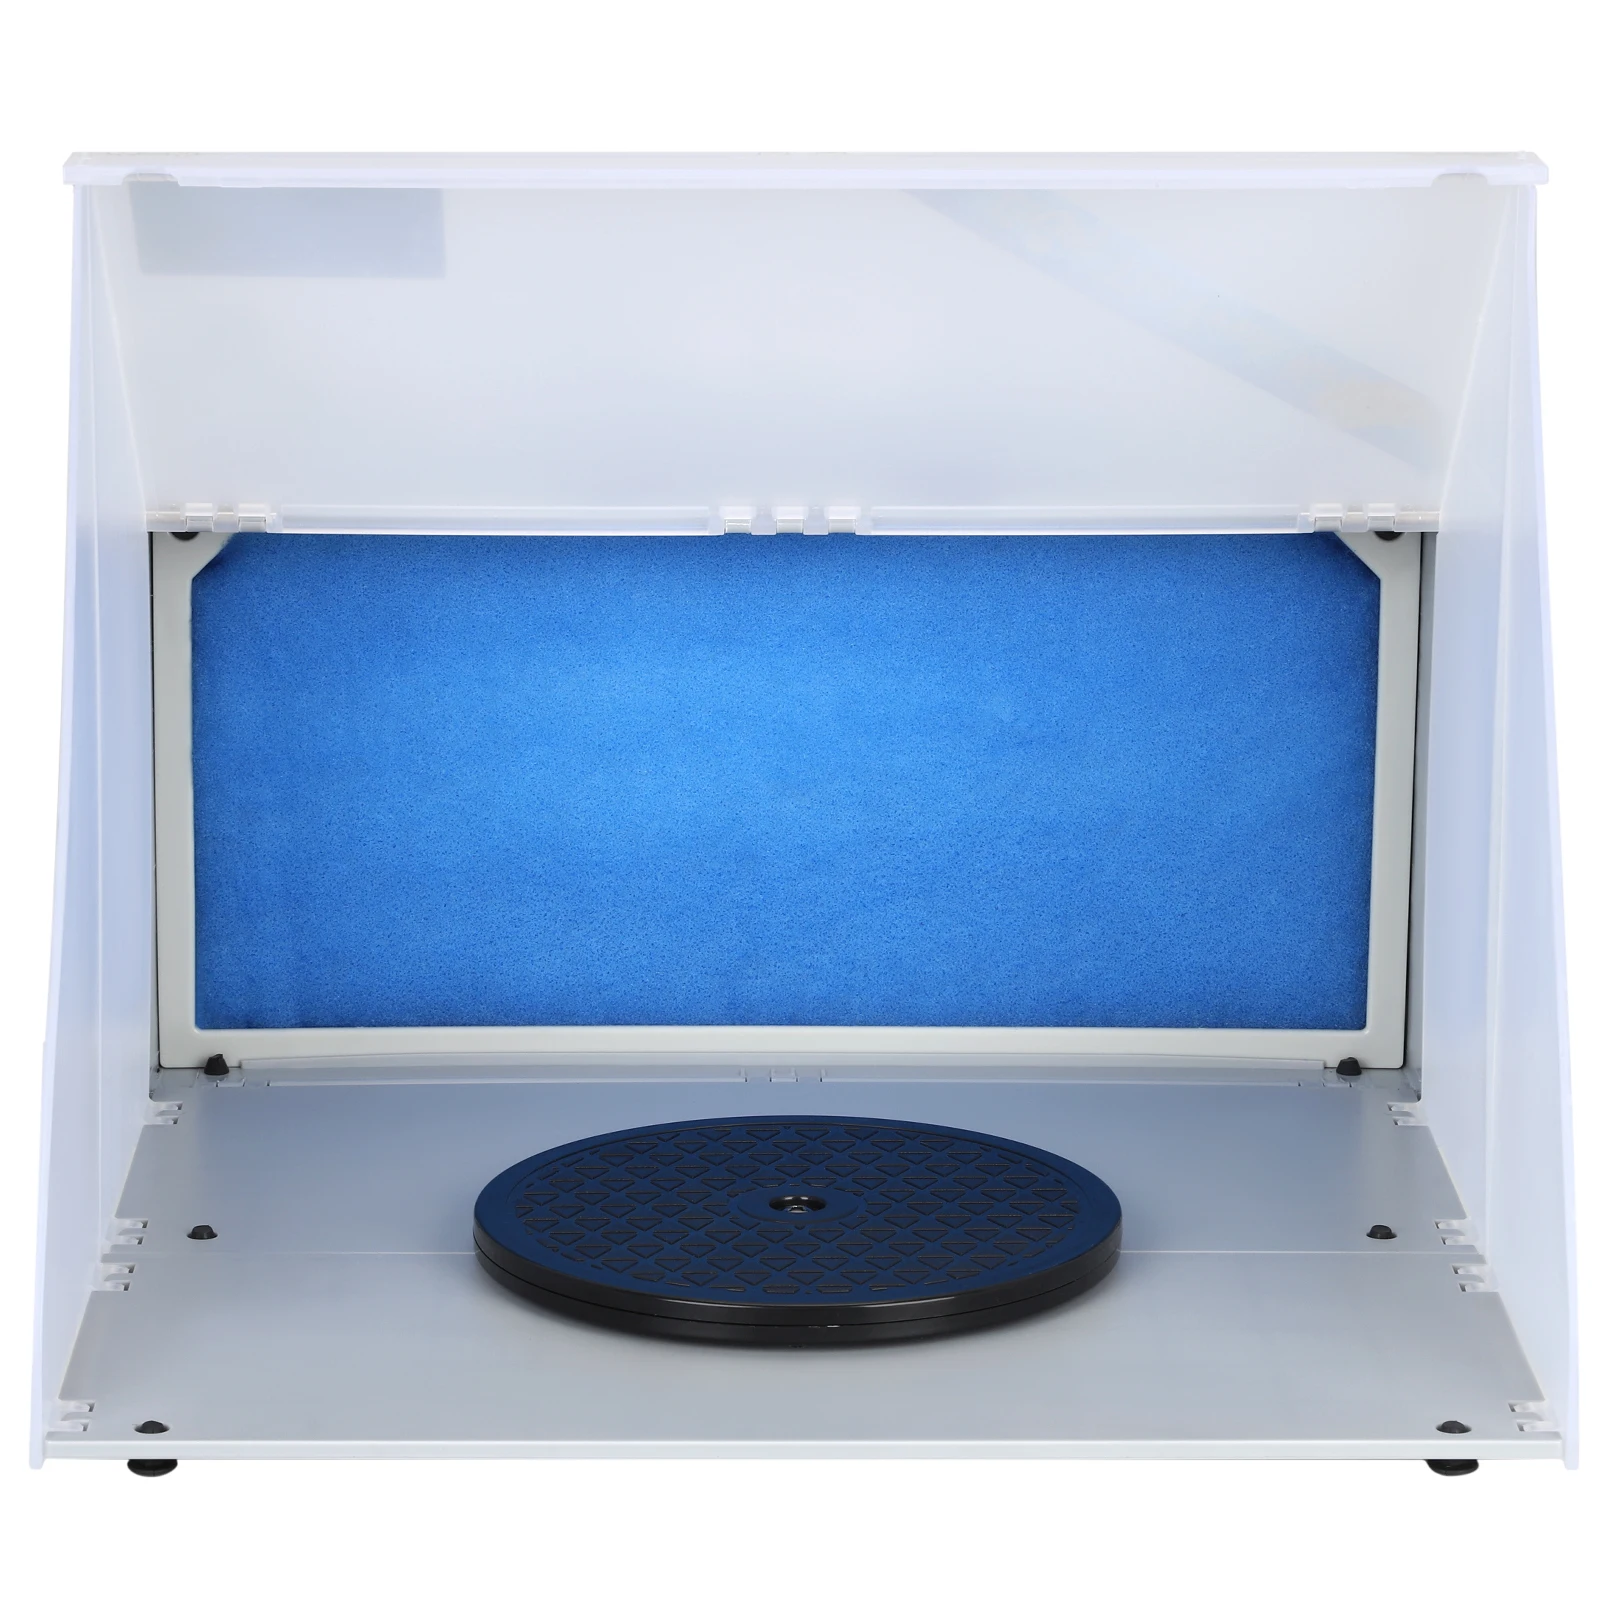 Airbrush Paint Spray Booth Exhaust Fan with Filter Portable Paint